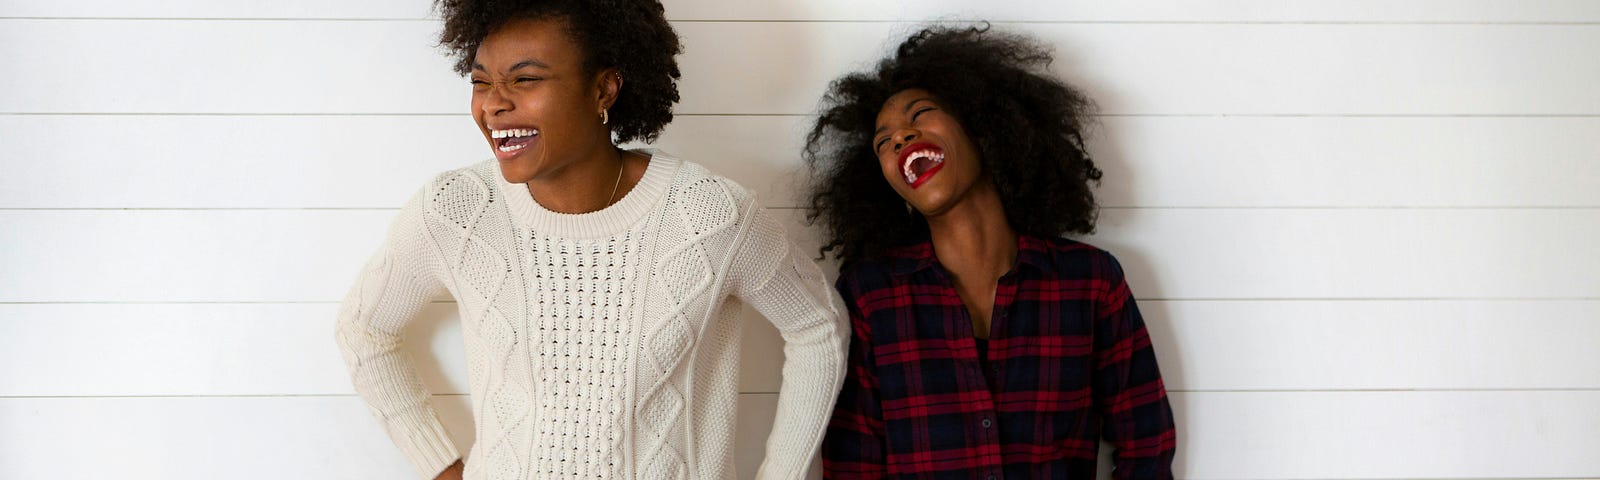 Two women standing in front of a wall, enjoying a good laugh together.